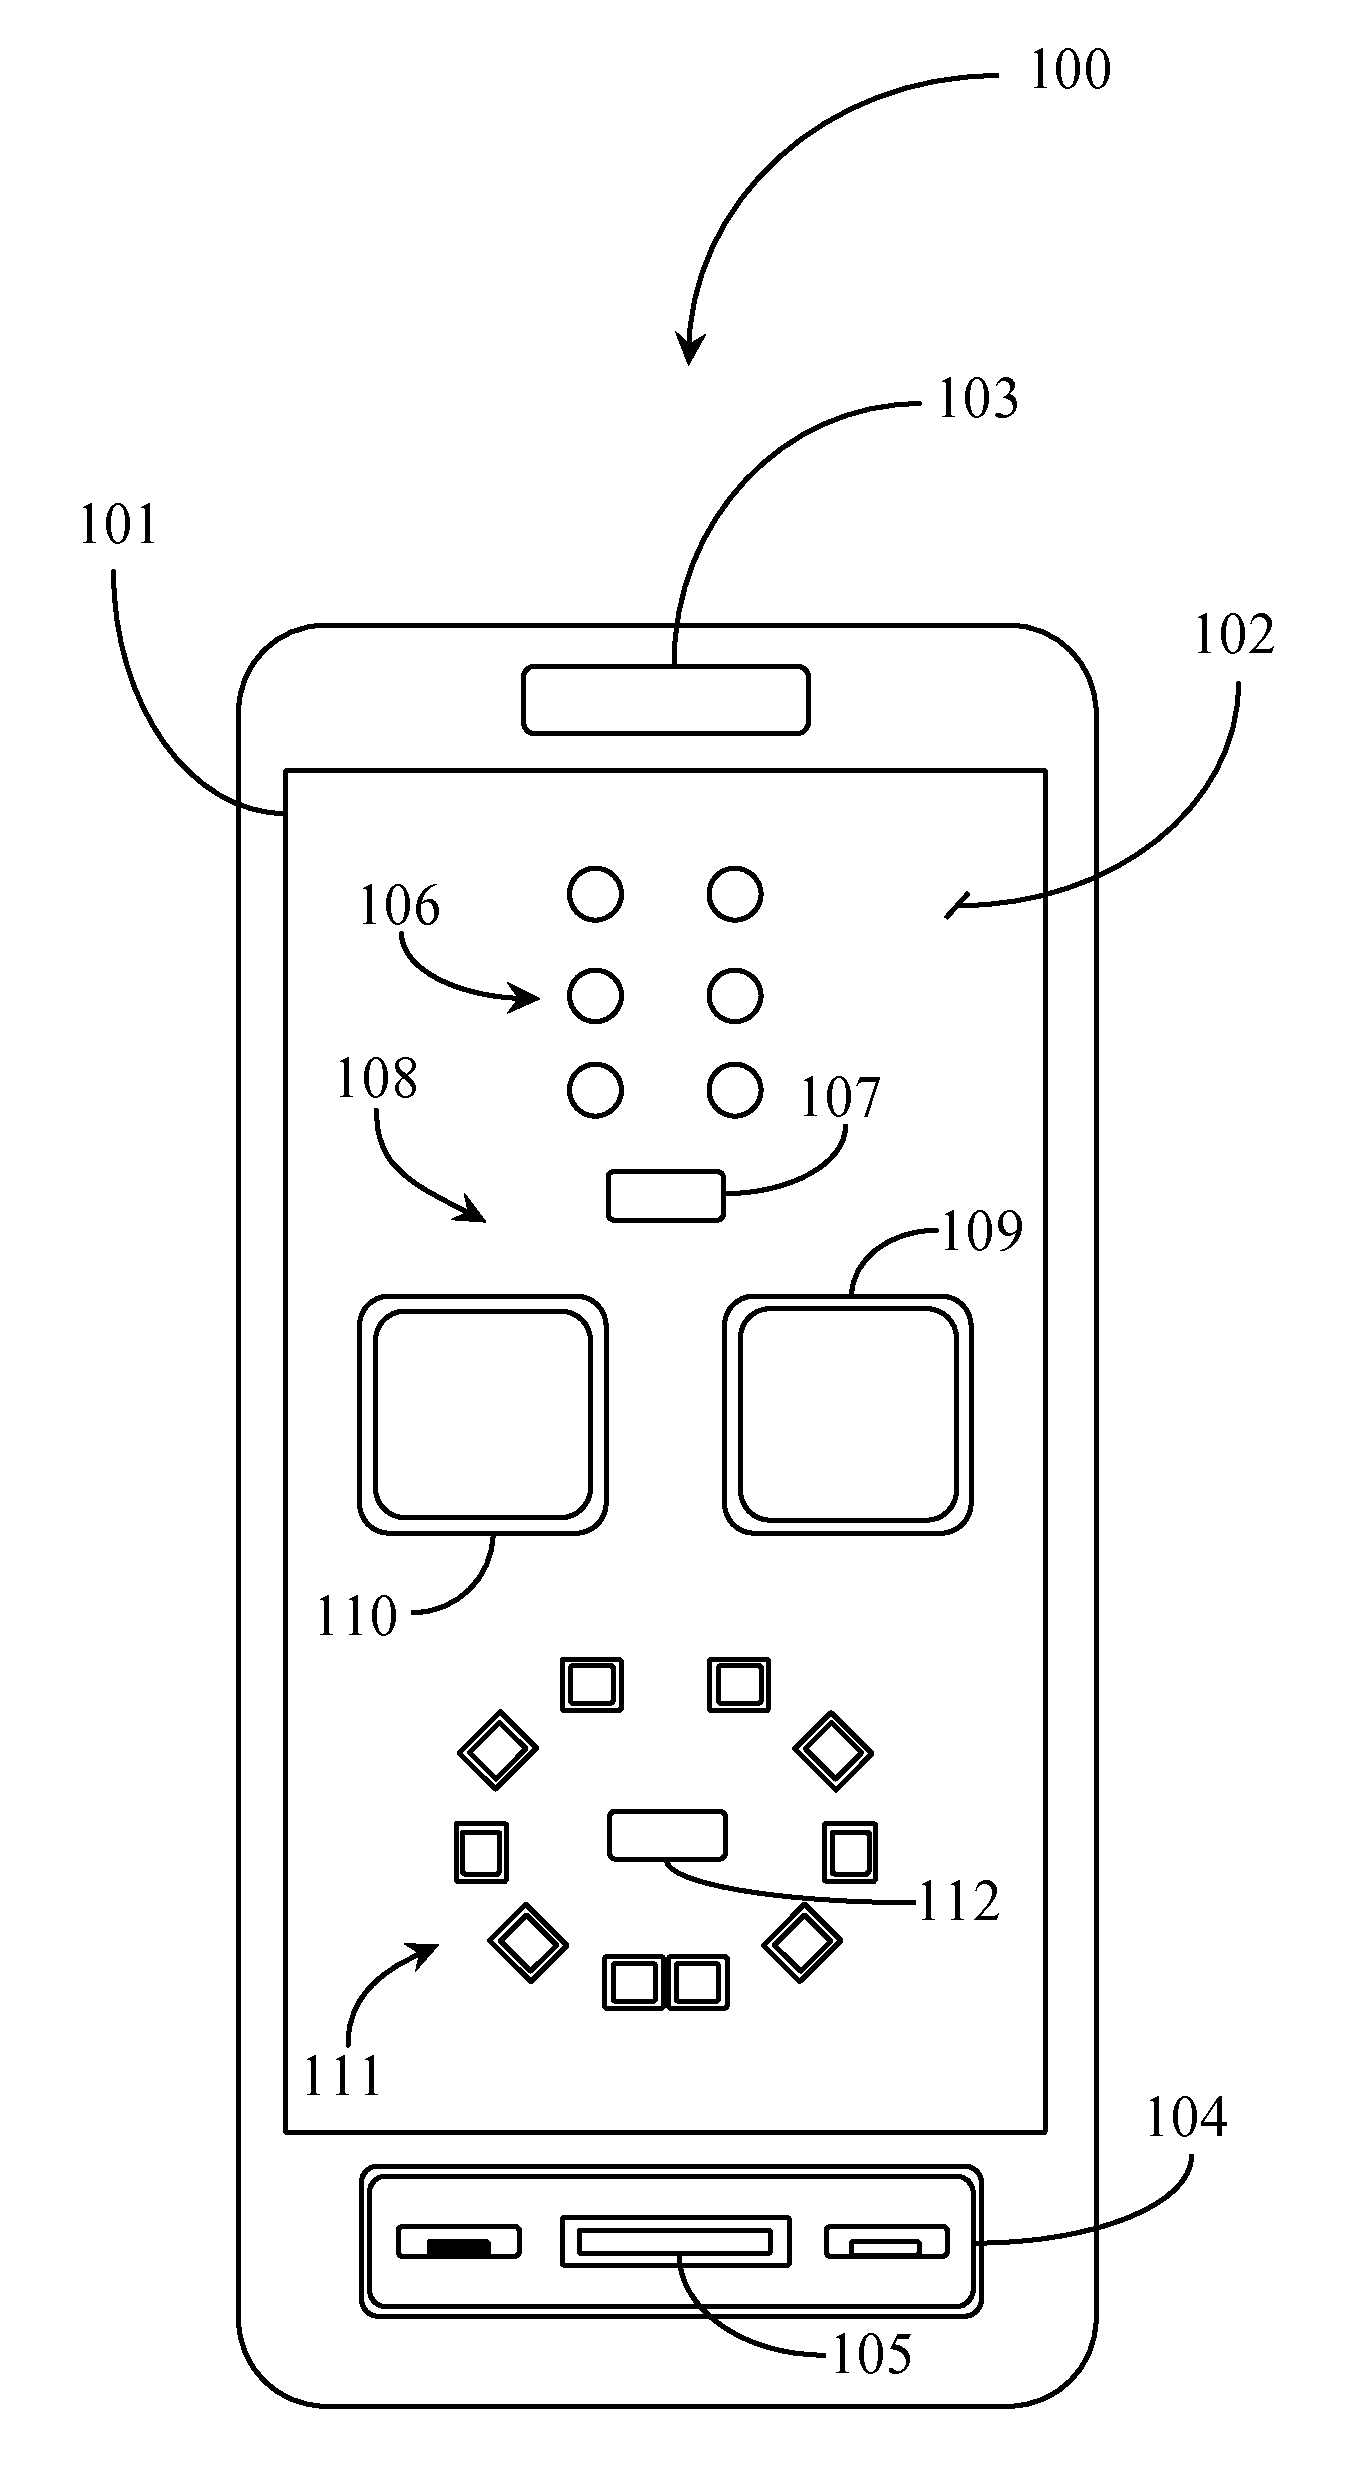 Touch screen overlay for visually impaired persons